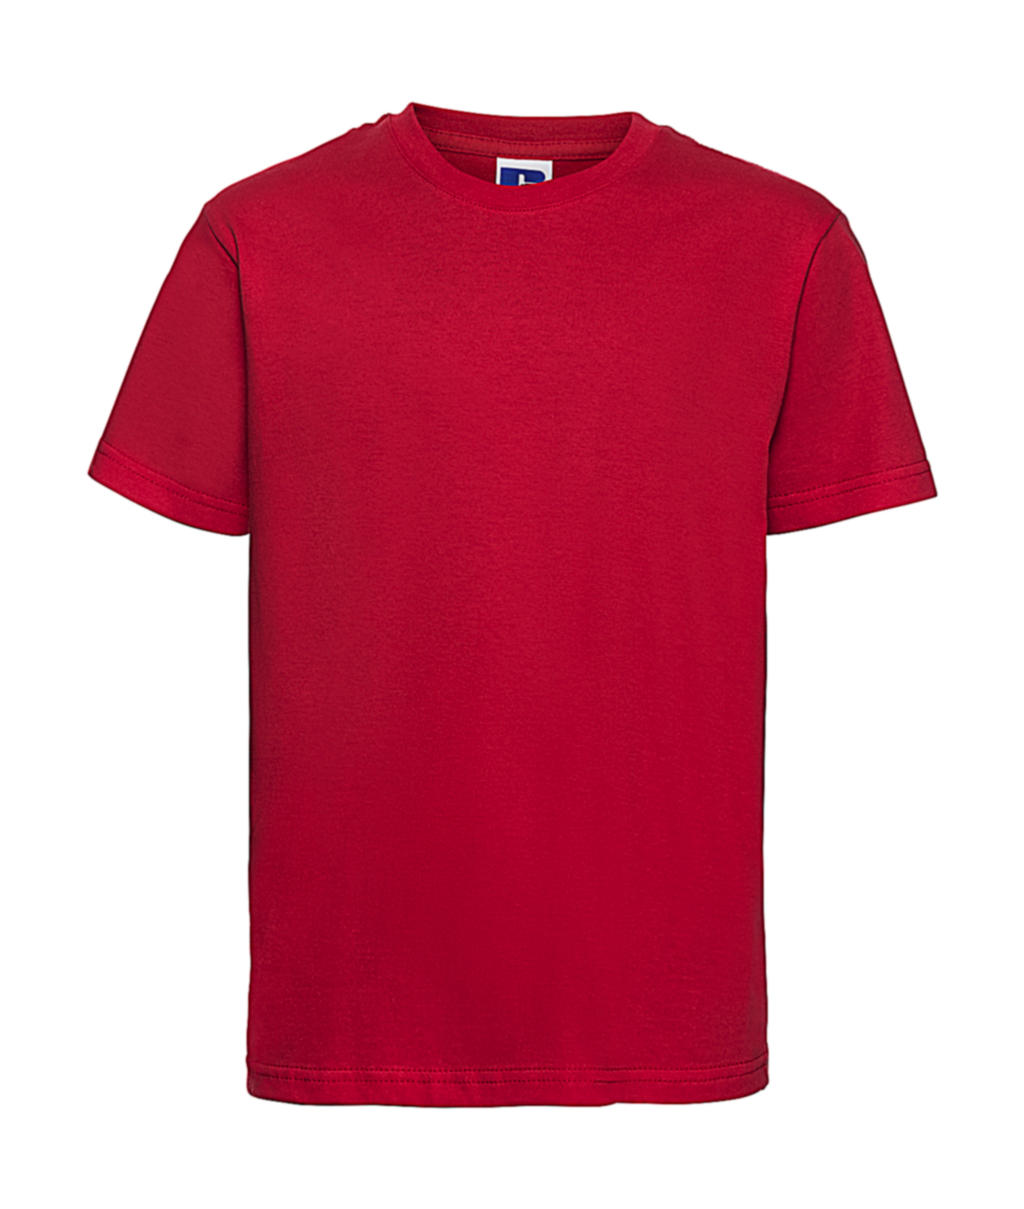  Kids Slim T-Shirt in Farbe Classic Red